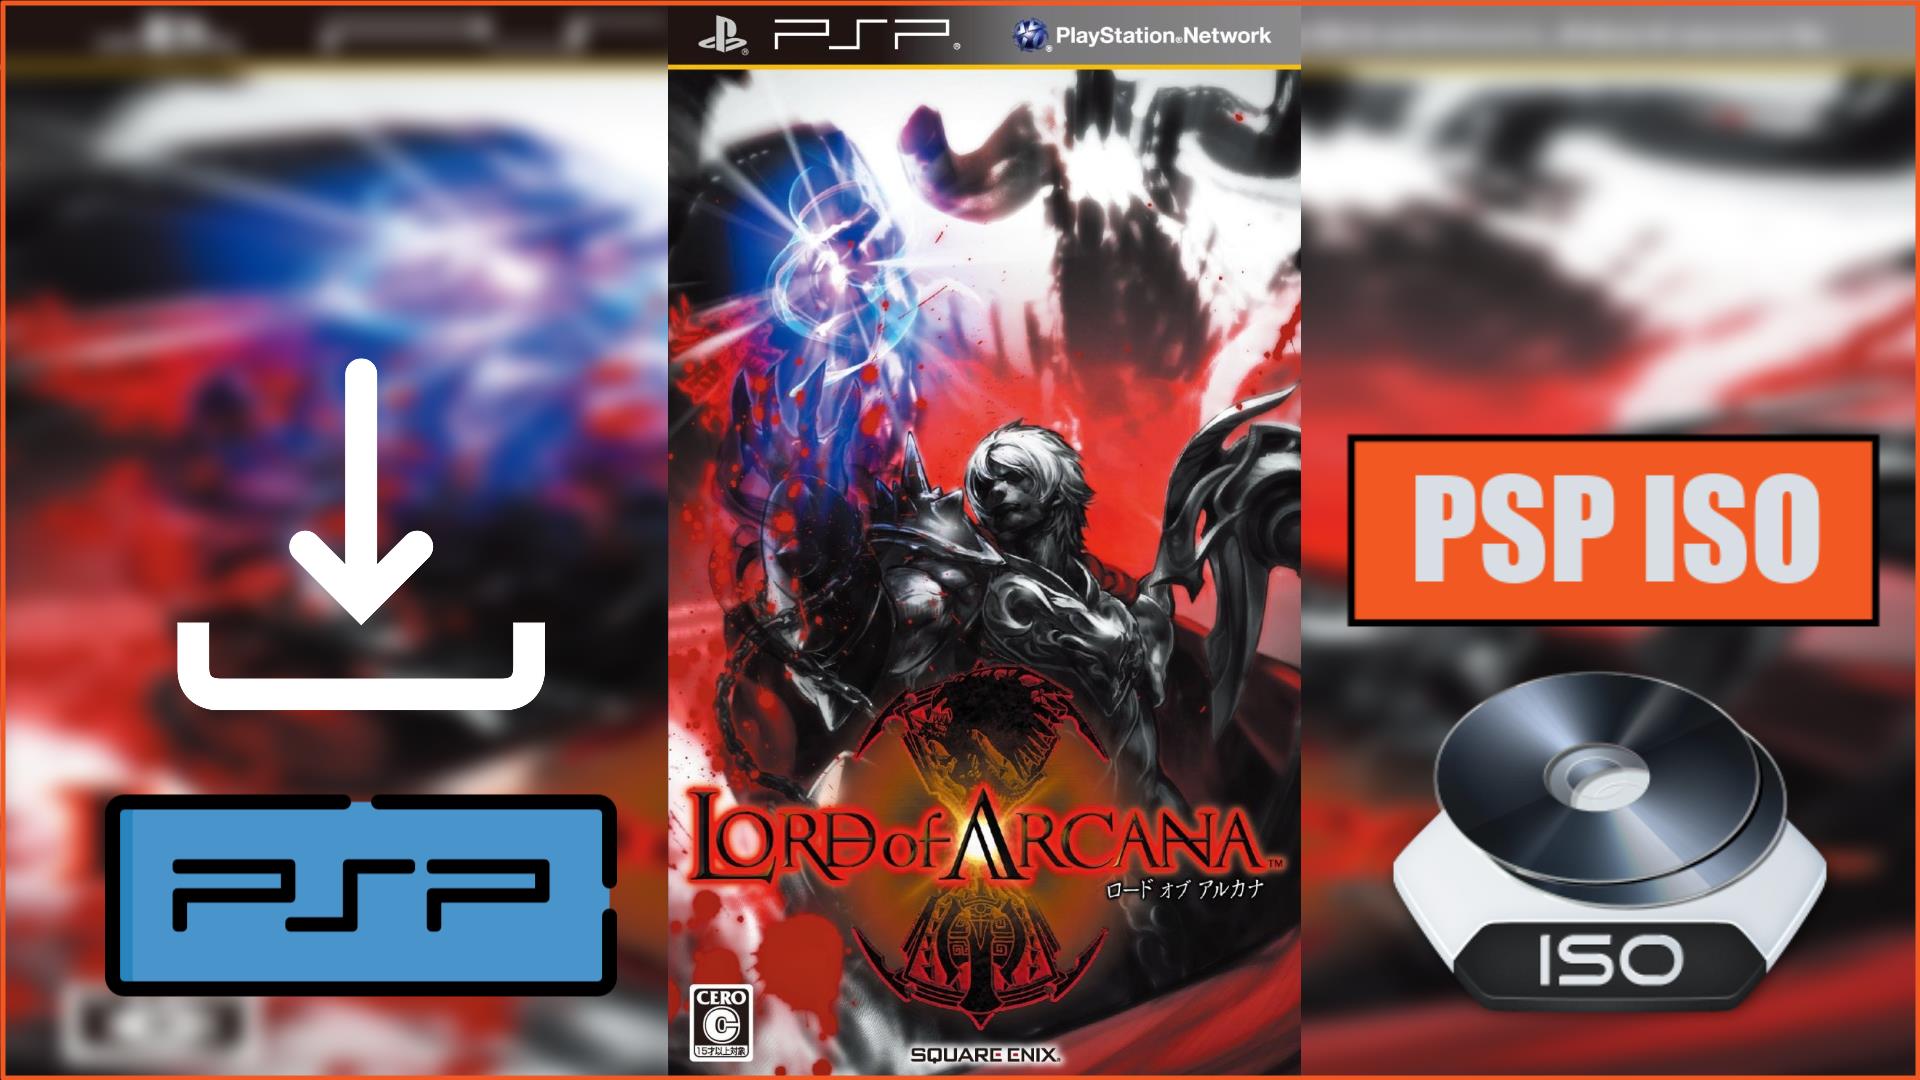 Lord of Arcana PSP ISO Download